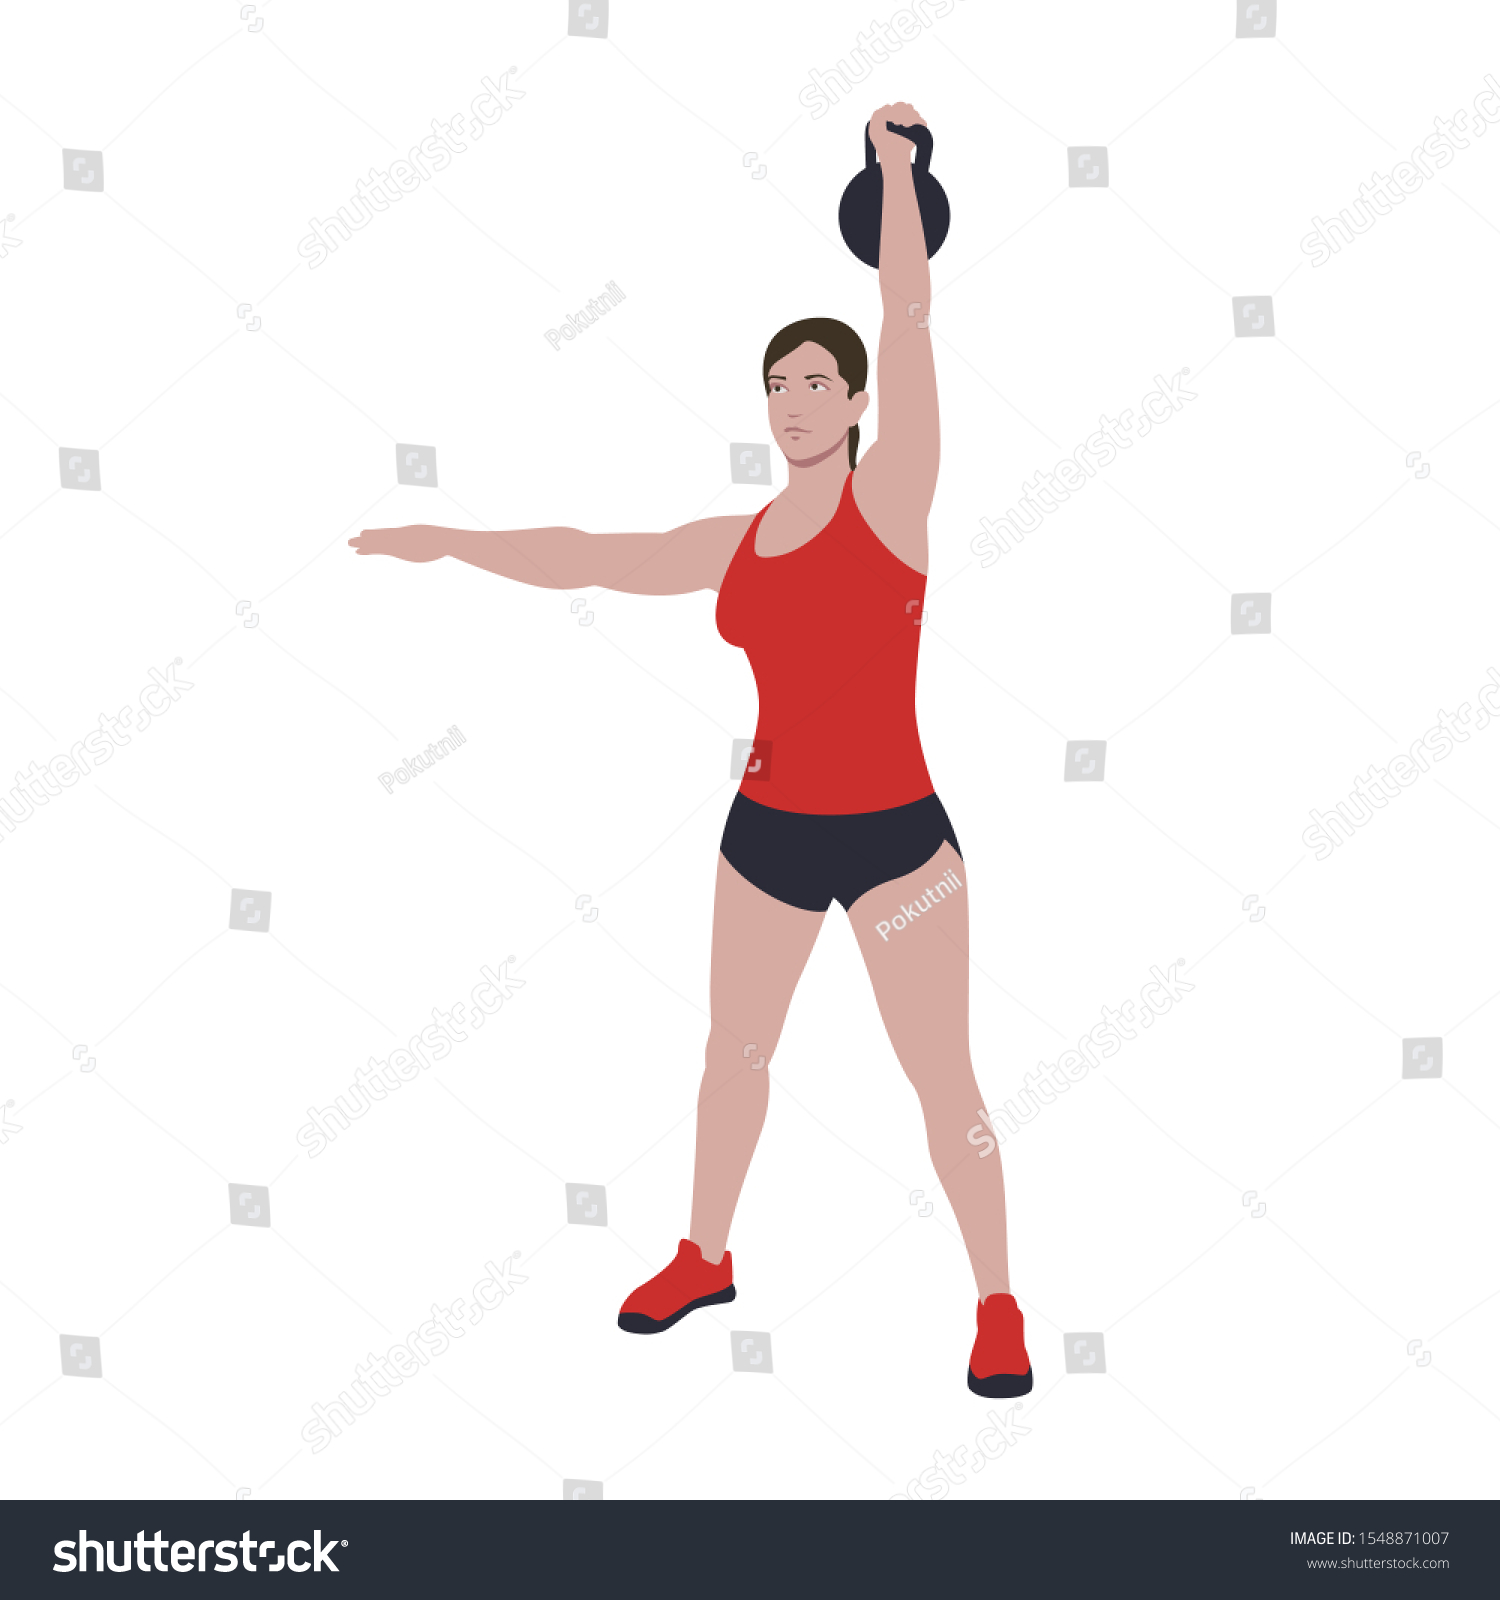 SVG of CrossFit workout training for open games championship. Sport girl training one arm kettlebell snatch exercise in the gym for healthy beautiful body shape motivation. svg